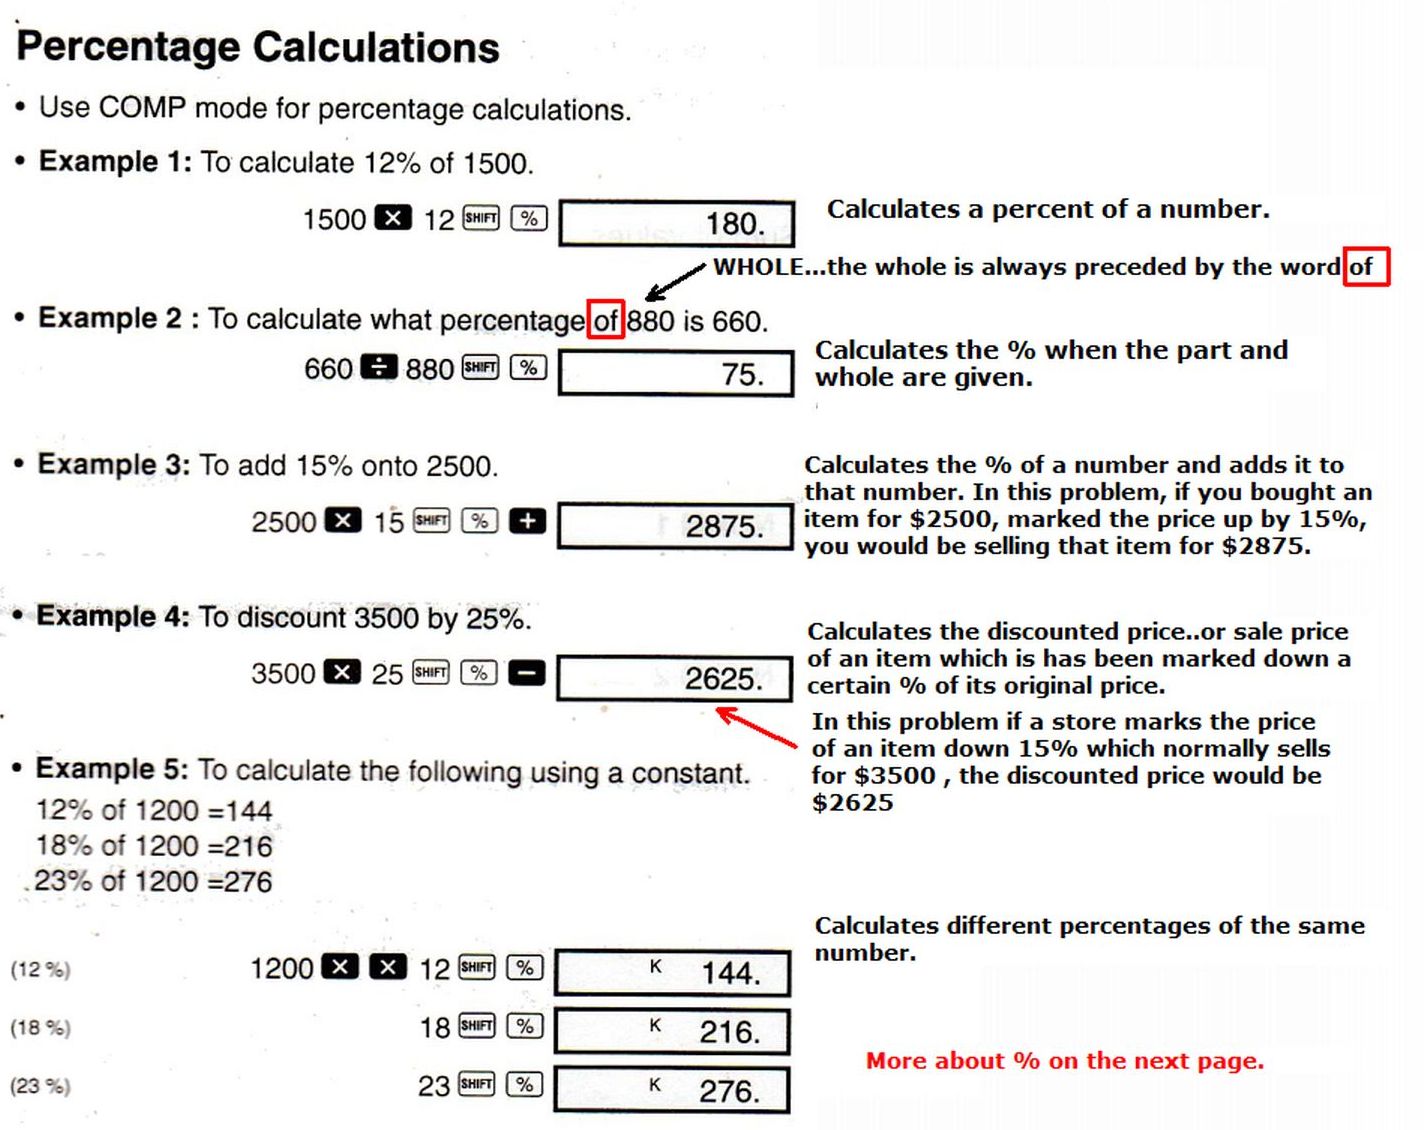 Do you have to be able to calculate percentages to get a GED?